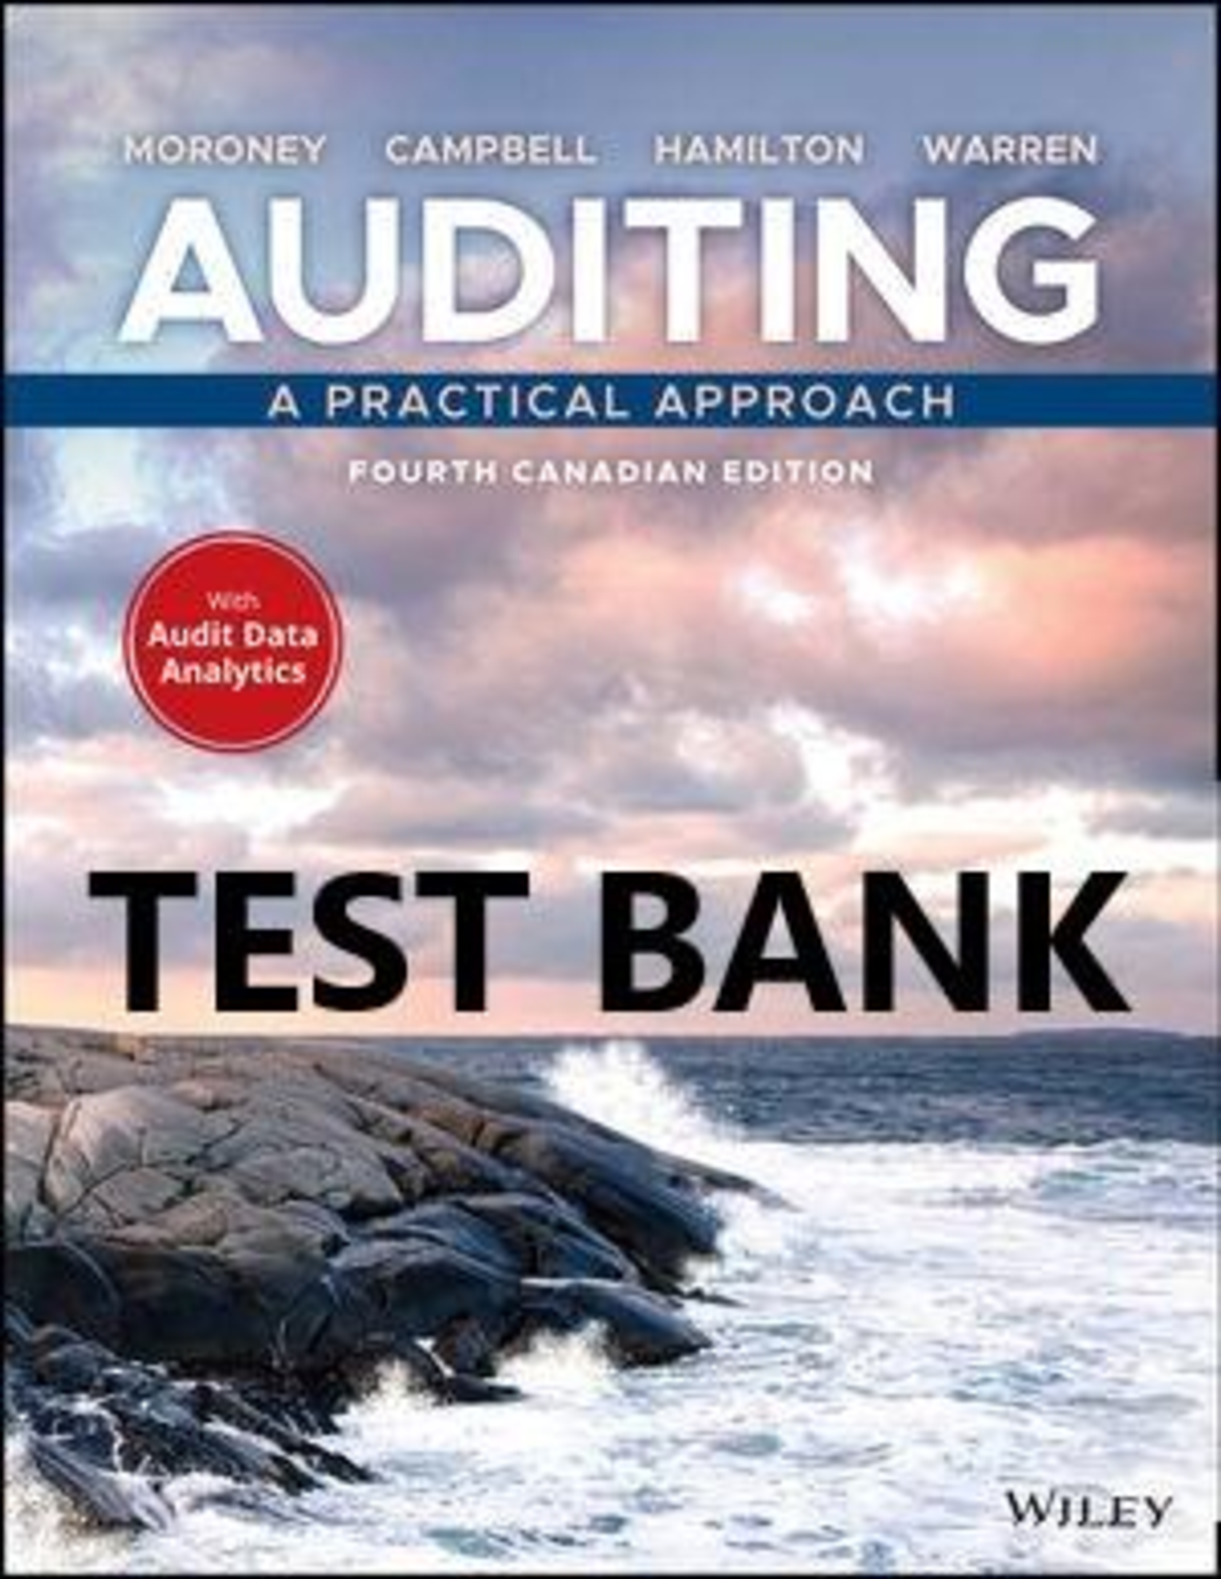 Auditing A Practical Approach, 4th Canadian Edition by Moroney Test Bank